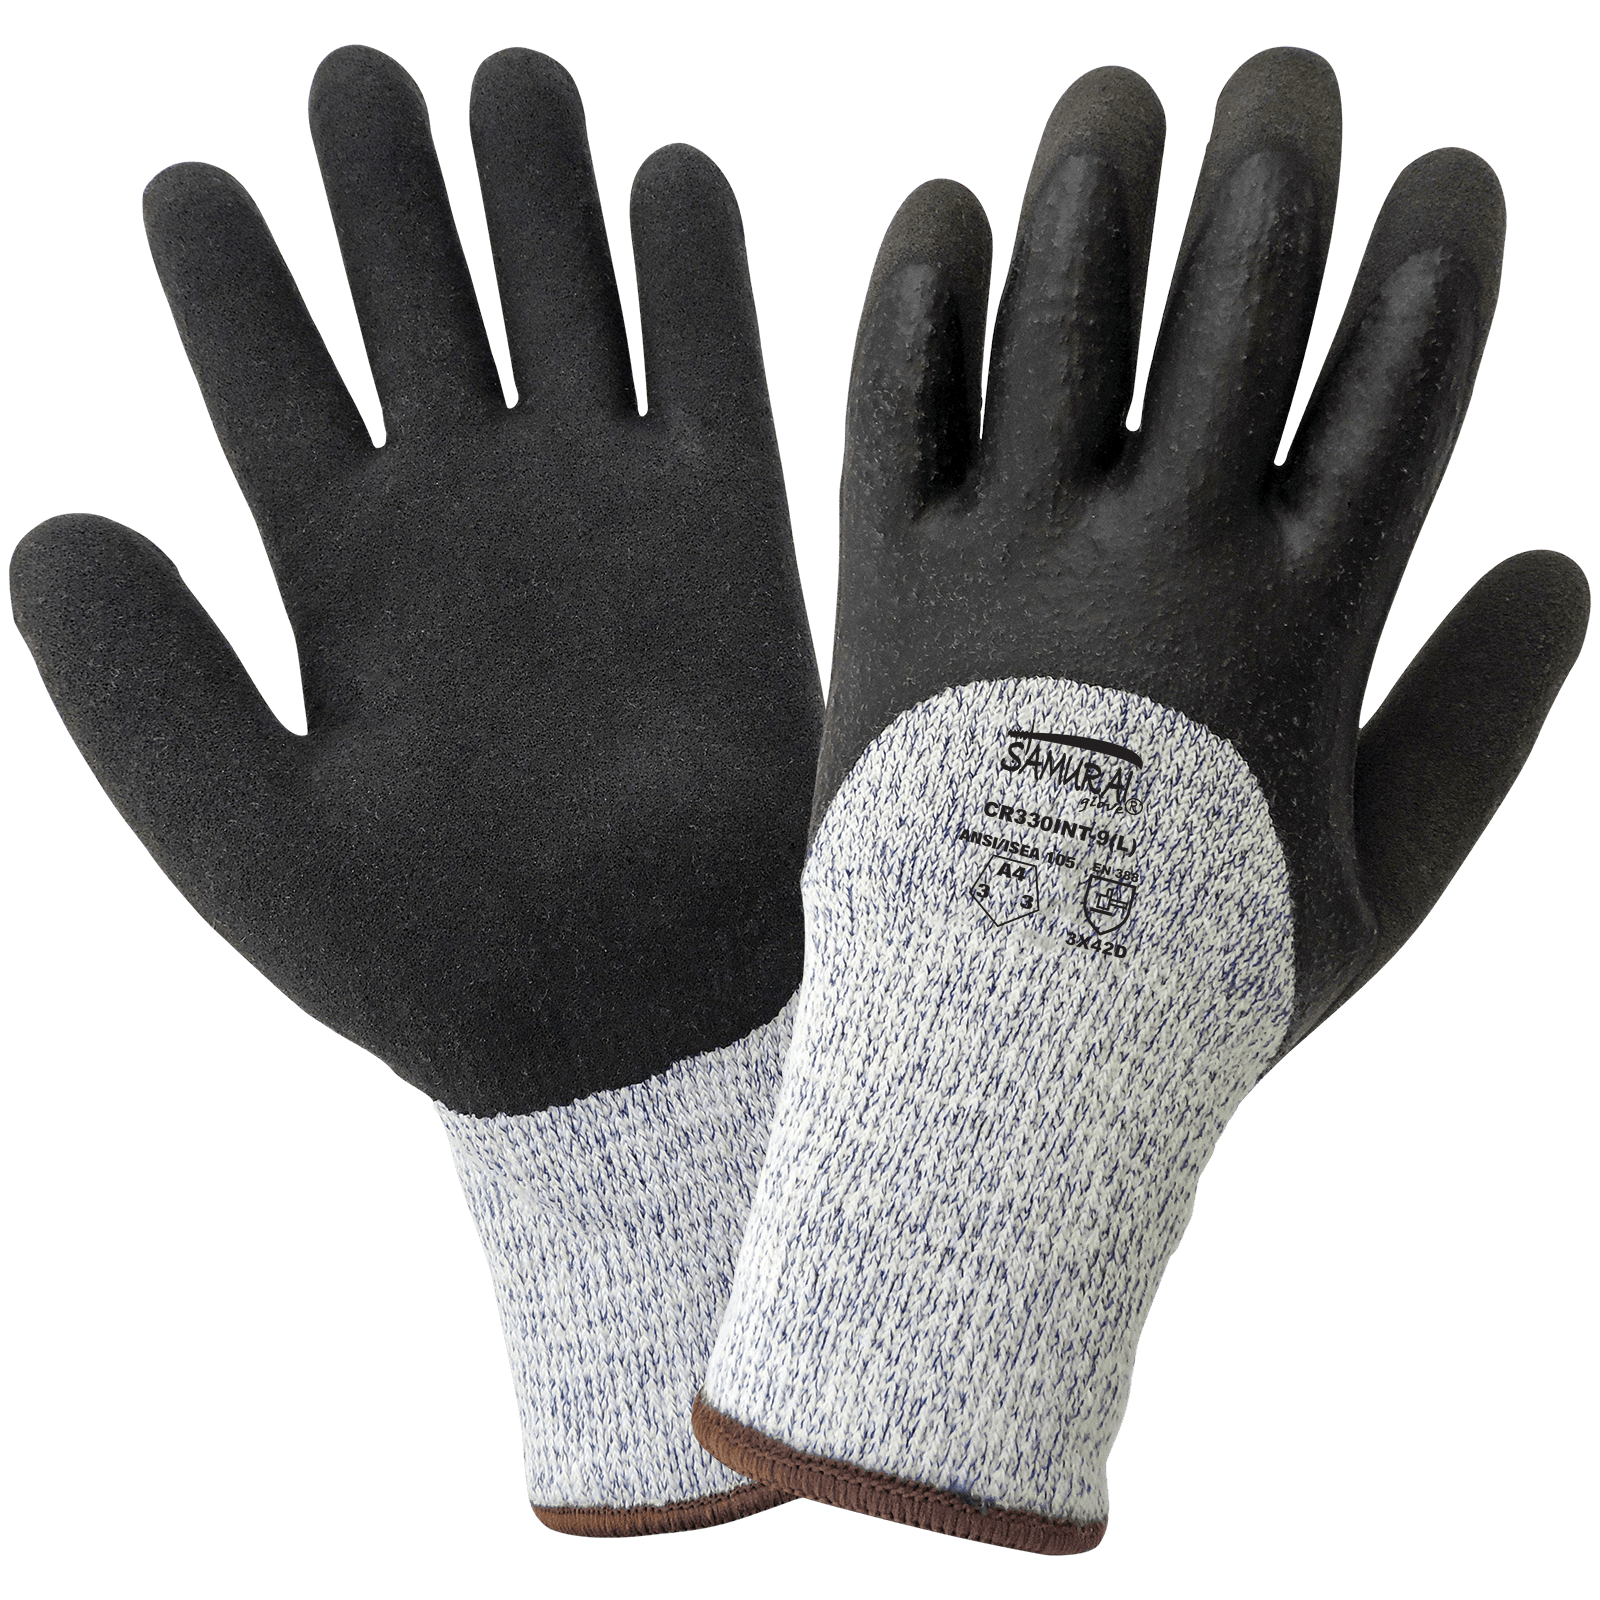 Global Gloves Samurai Cut-Resistant Low-Temperature Gloves from Columbia Safety